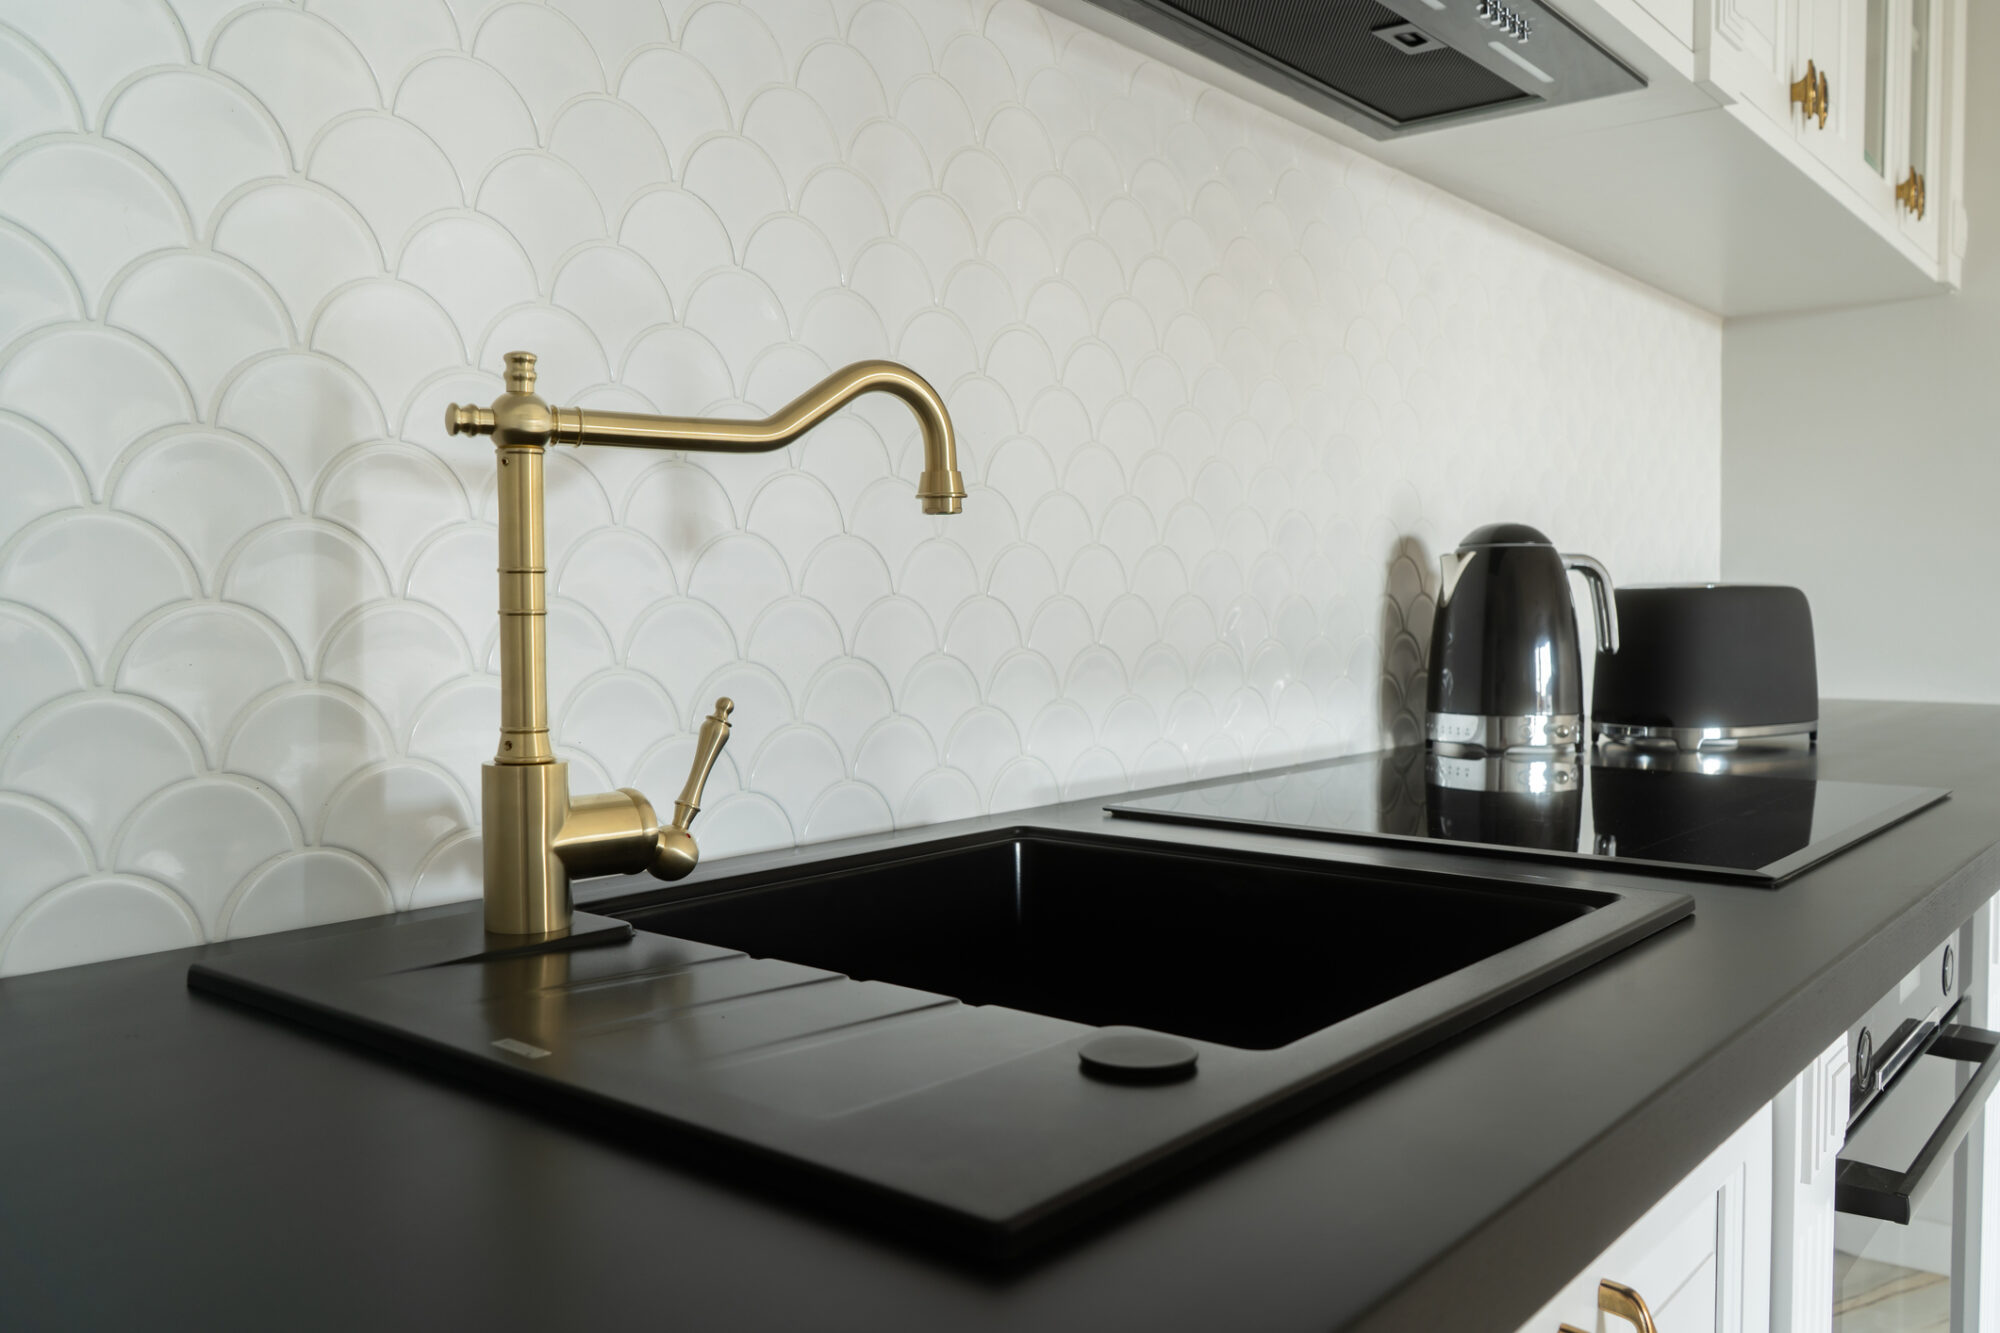 Stylish Kitchen Sink With Gold Faucet And Black Countertop